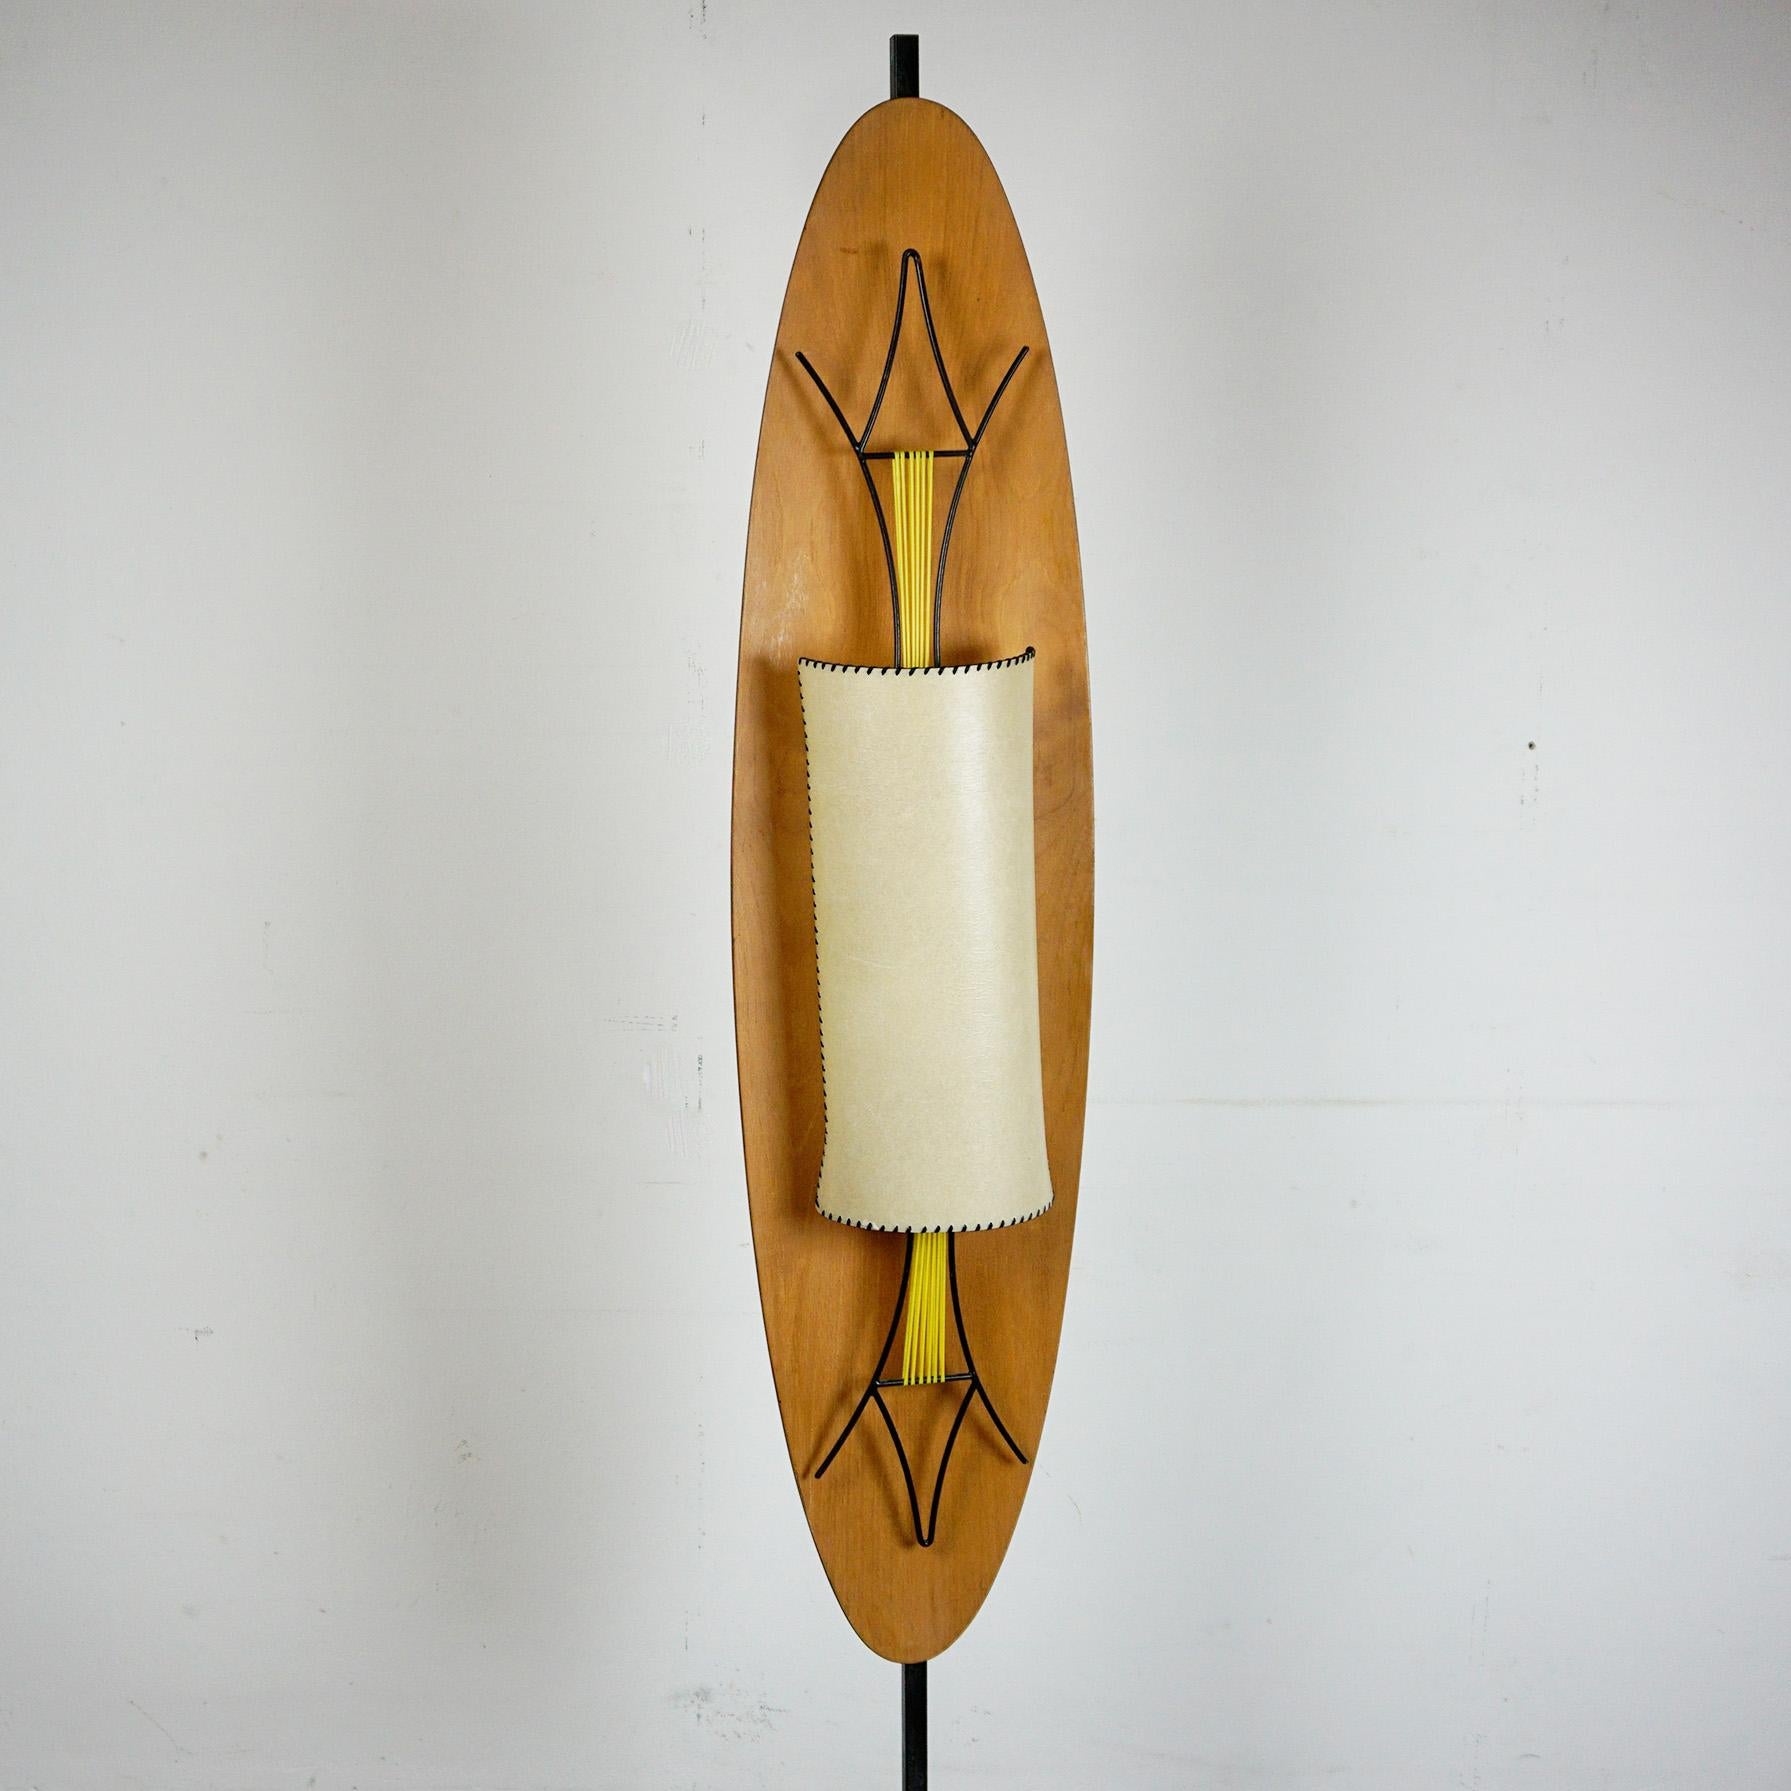 Lacquered Italian Midcentury Marble and Wood Totem Floor Lamp by Goffredo Reggiani